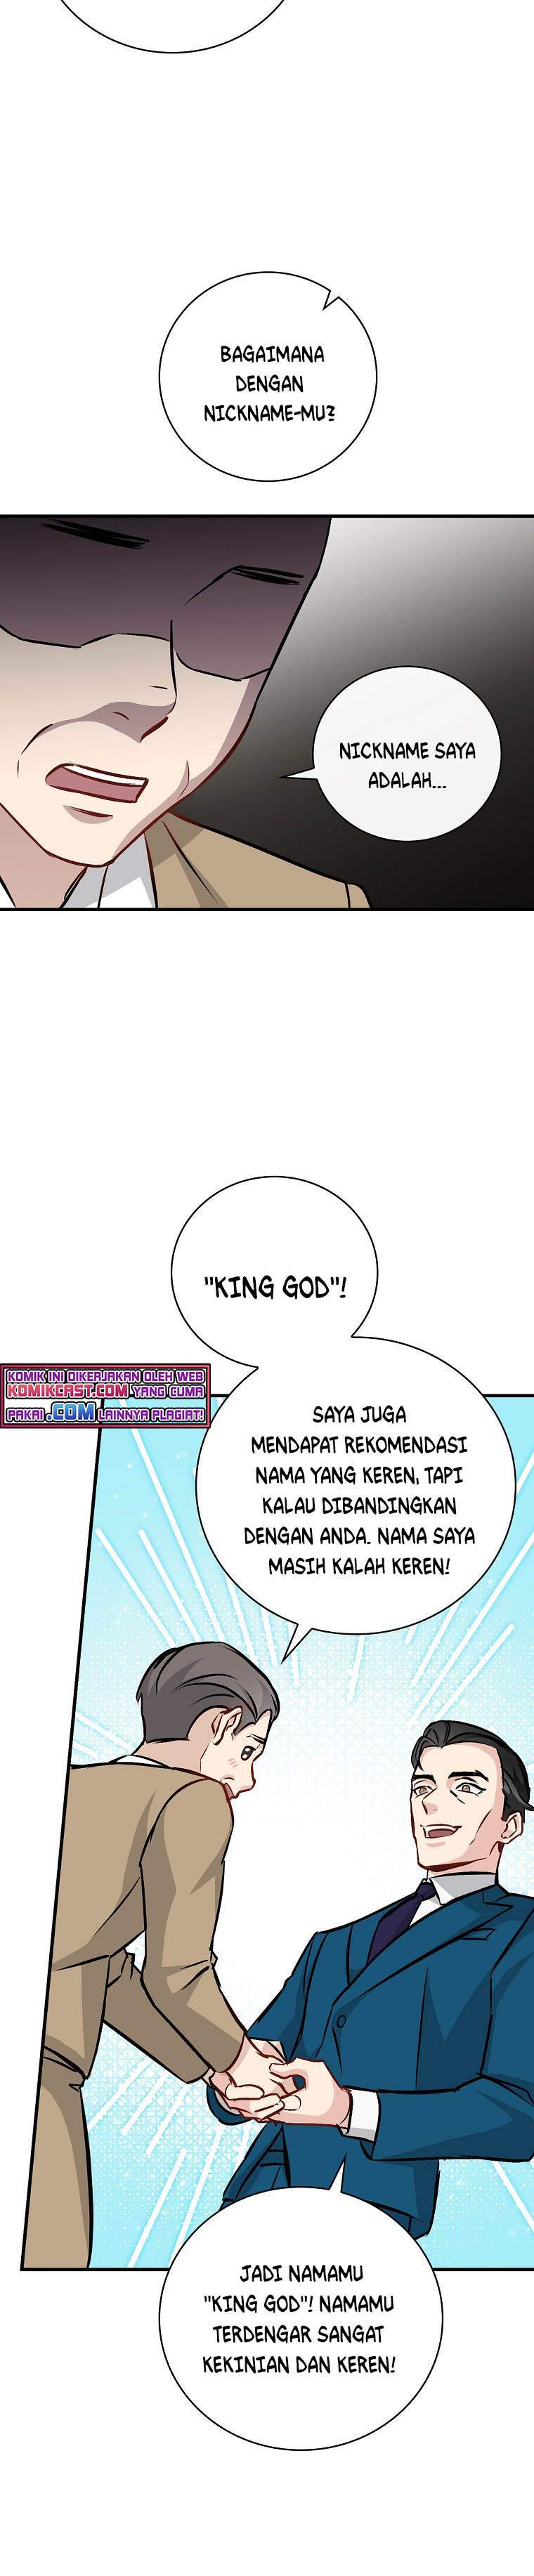 Leveling Up, By Only Eating! (Gourmet Gaming) Chapter 83 - 233